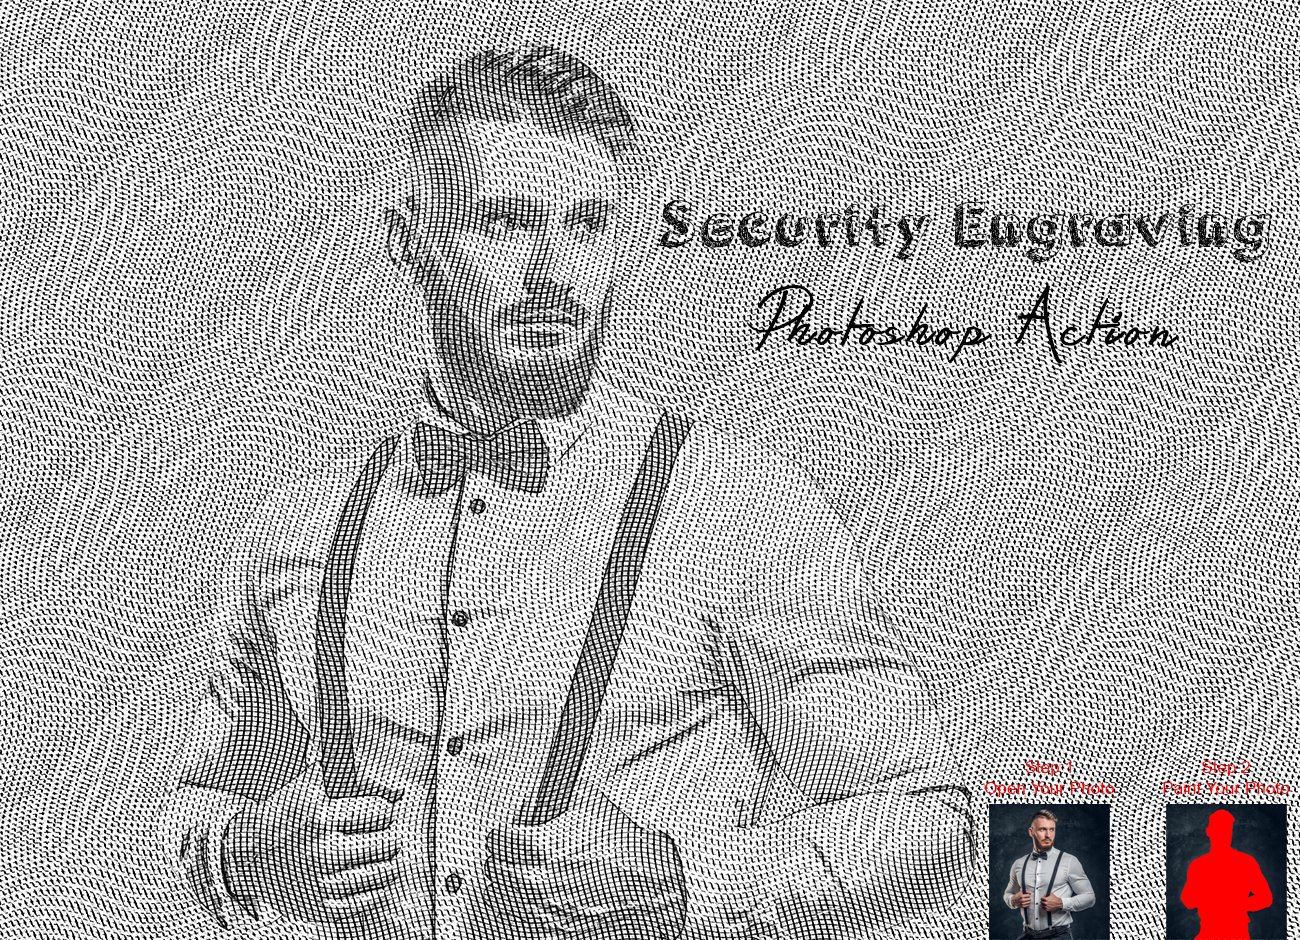 Security Engraving Photoshop Action 10301276